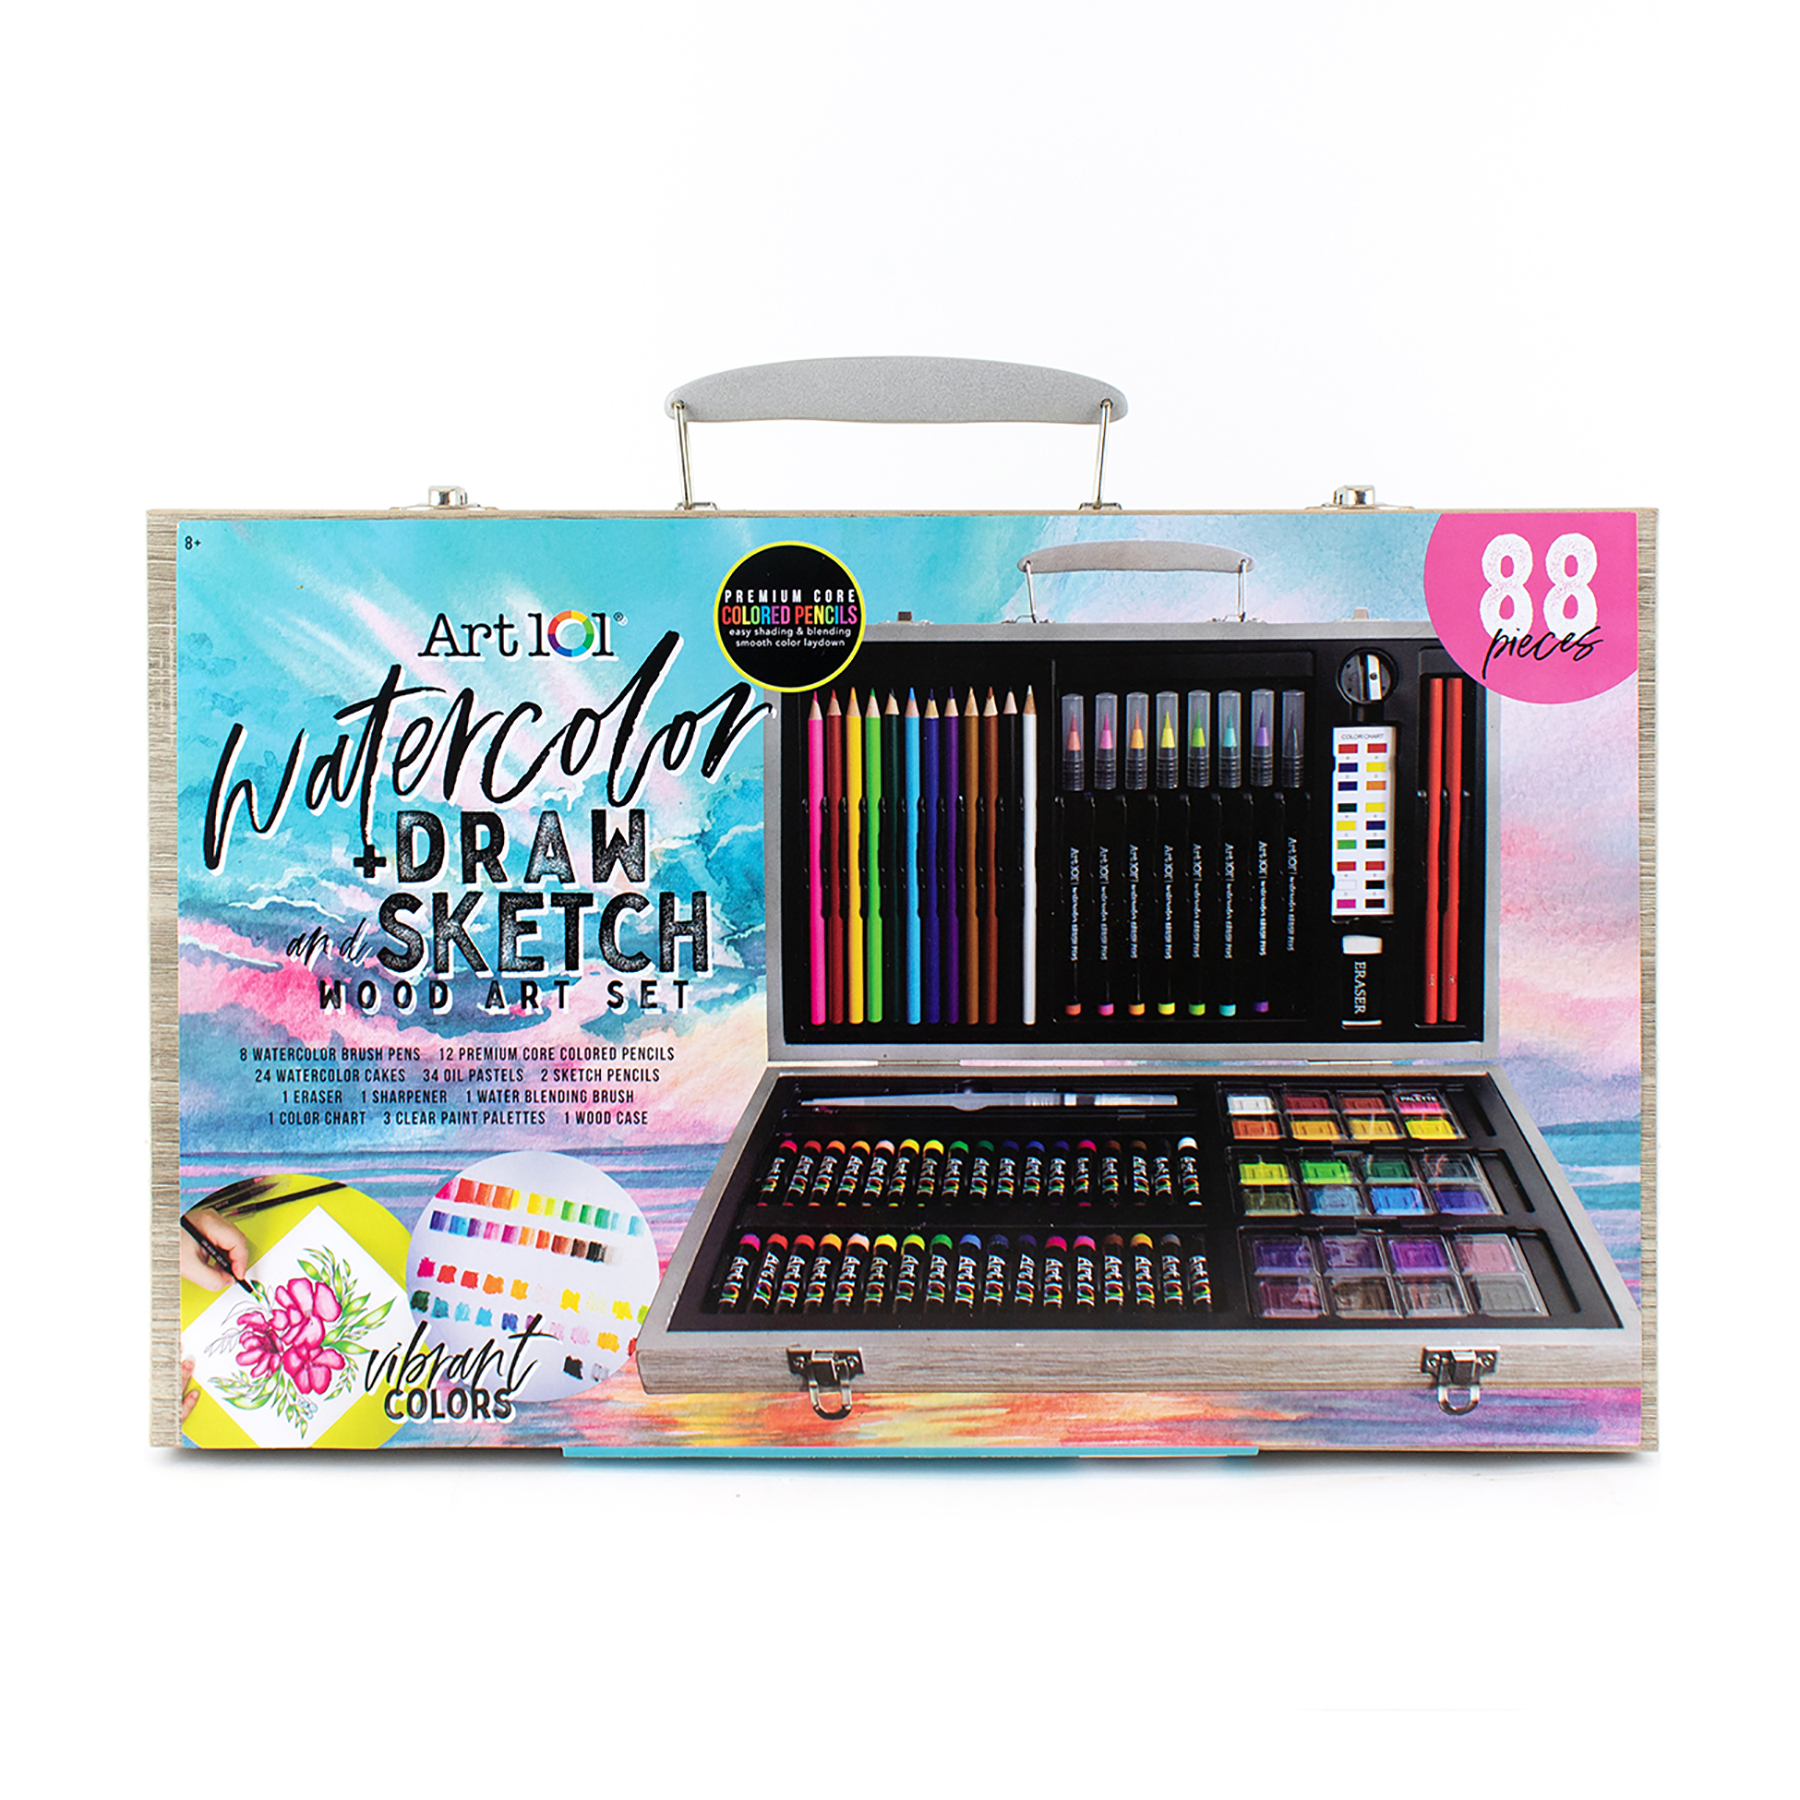 Art 101 Watercolor, Draw & Sketch Wood Art Set, 88 Pieces image number null